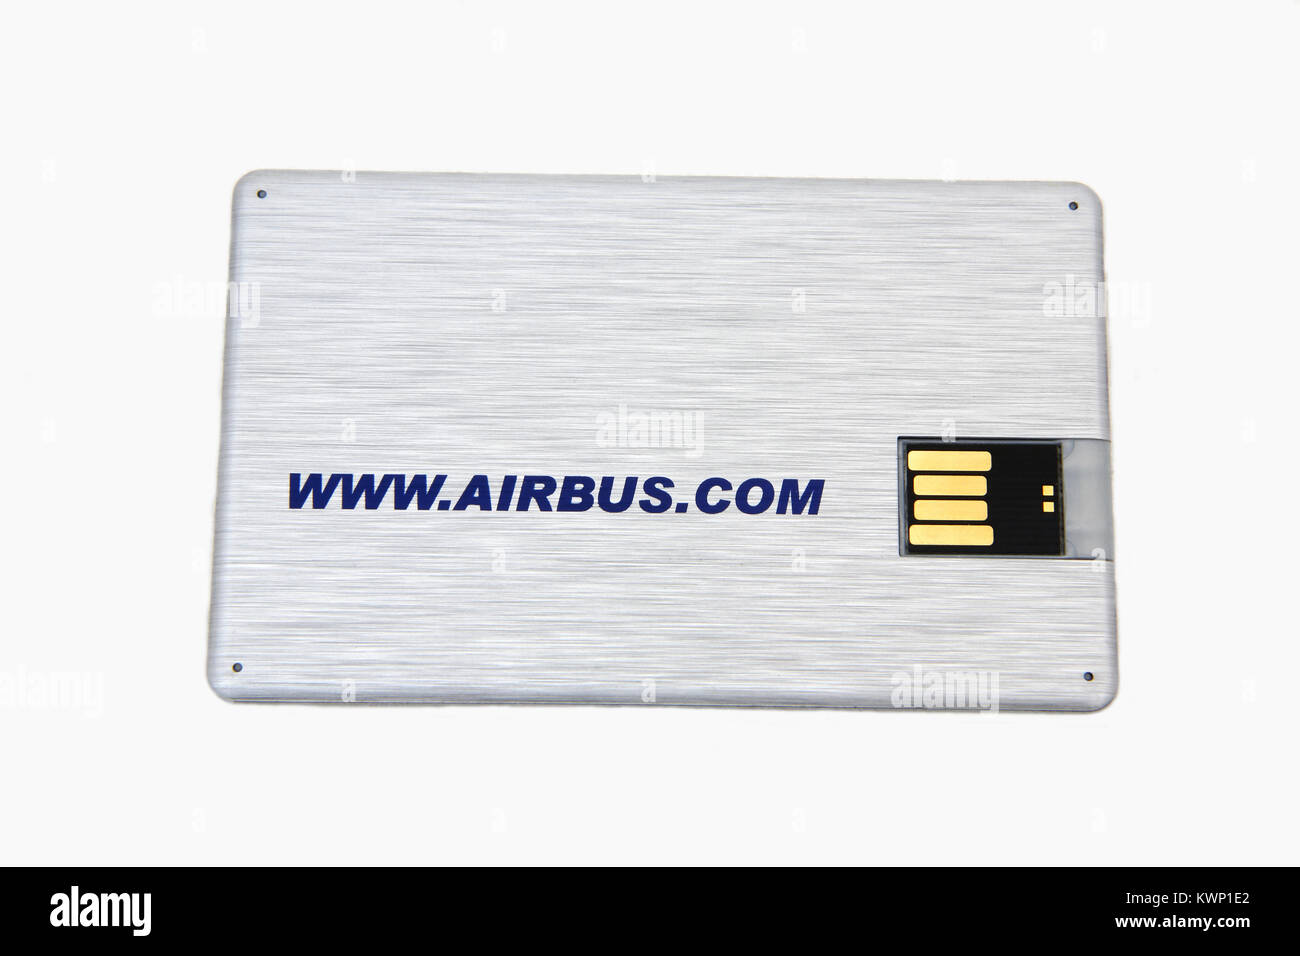 A Promotional USB Memory Card With Airbus Website Stock Photo